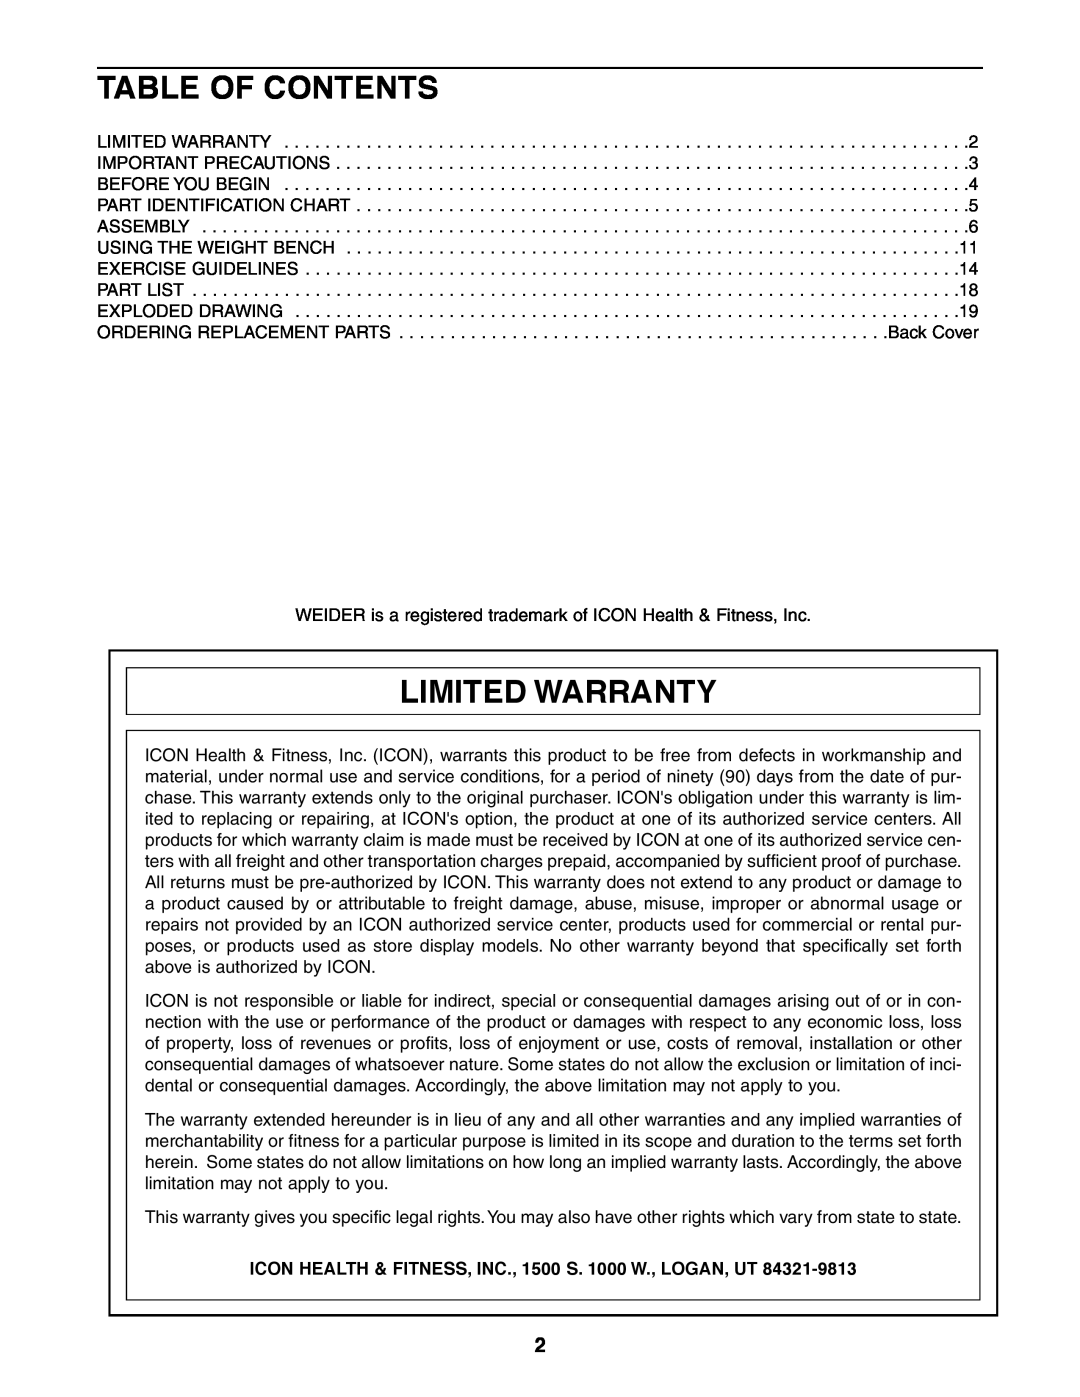 Weider 831.150470 user manual Table Of Contents, Limited Warranty, ICON HEALTH & FITNESS, INC., 1500 S. 1000 W., LOGAN, UT 